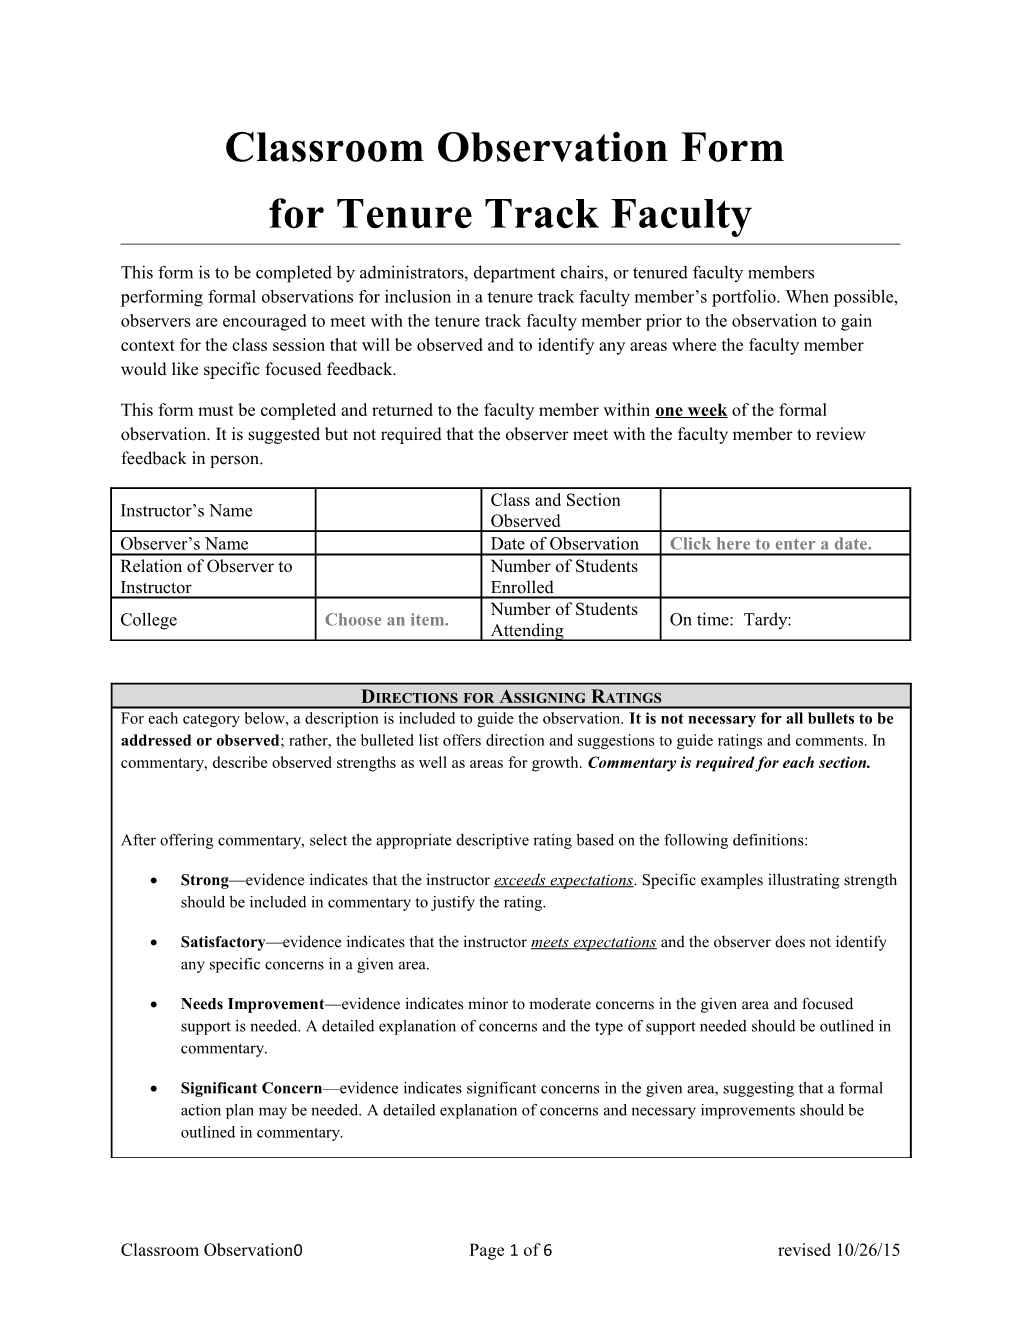 For Tenure Track Faculty